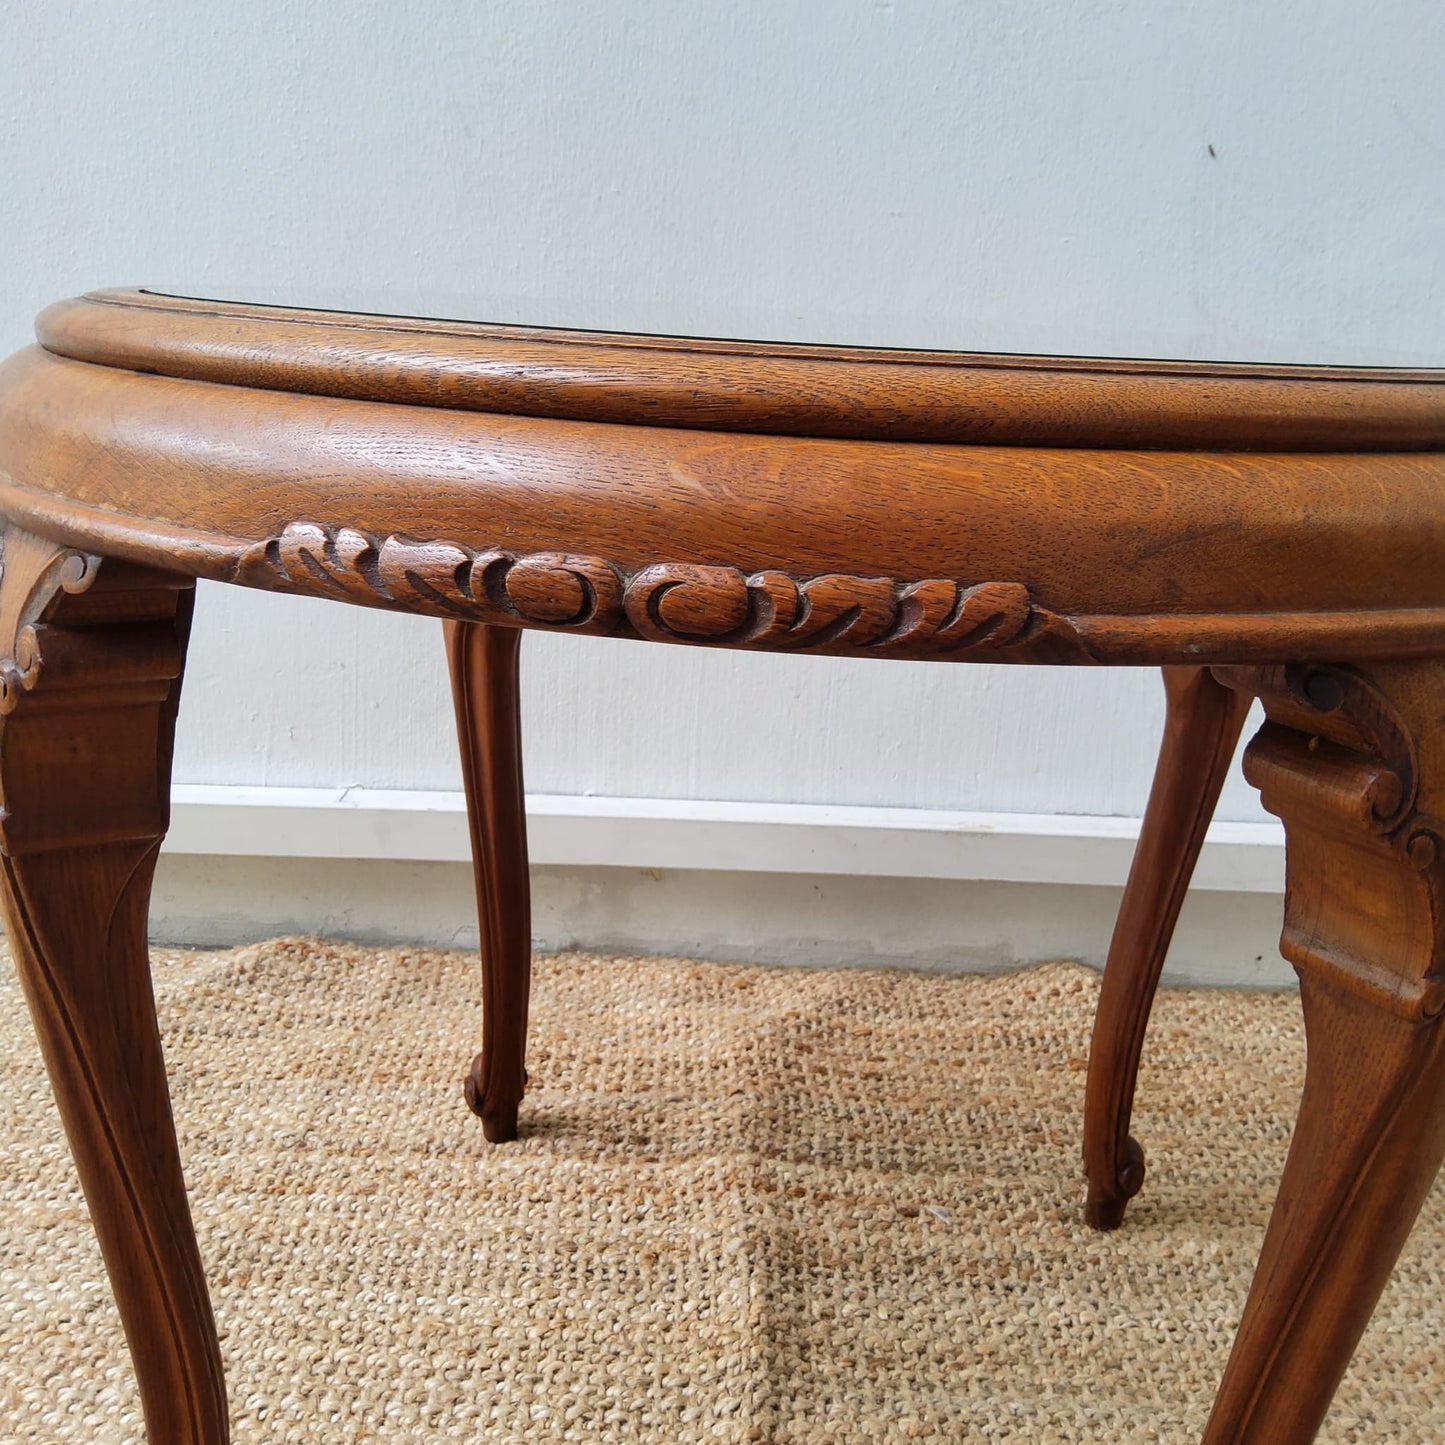 FRENCH HANDCARVED OAK ROUND COFFEE TABLE With CANE TOP